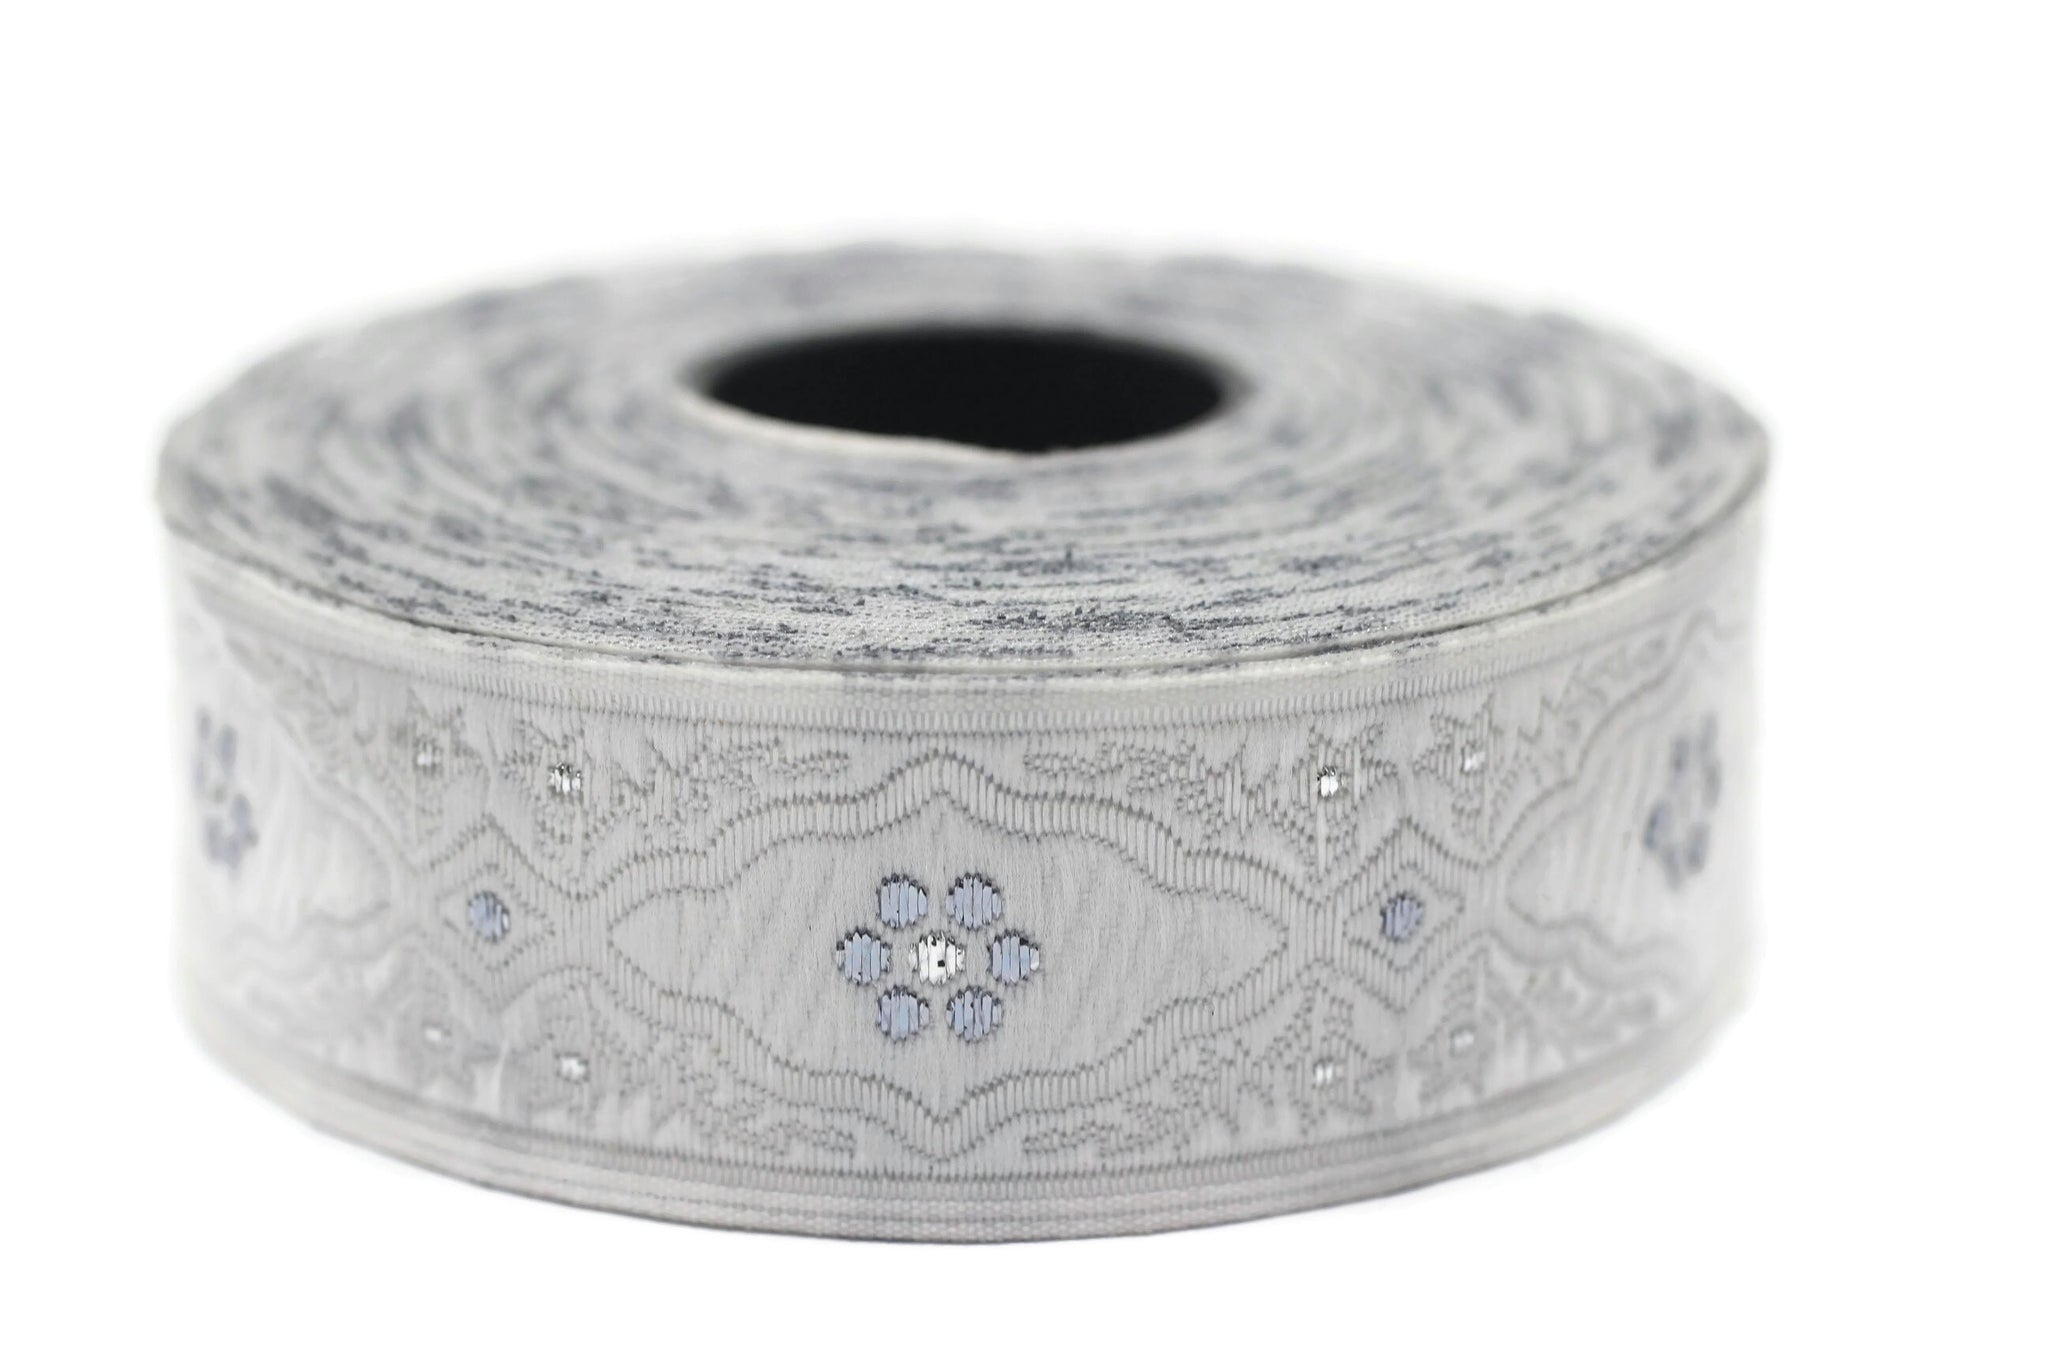 25 mm Andalusia White&Grey Jacquard ribbon, (0.98 inches), trim by the yard, Embroidered ribbon, Sewing trim, Scroll Jacquard trim, 25800